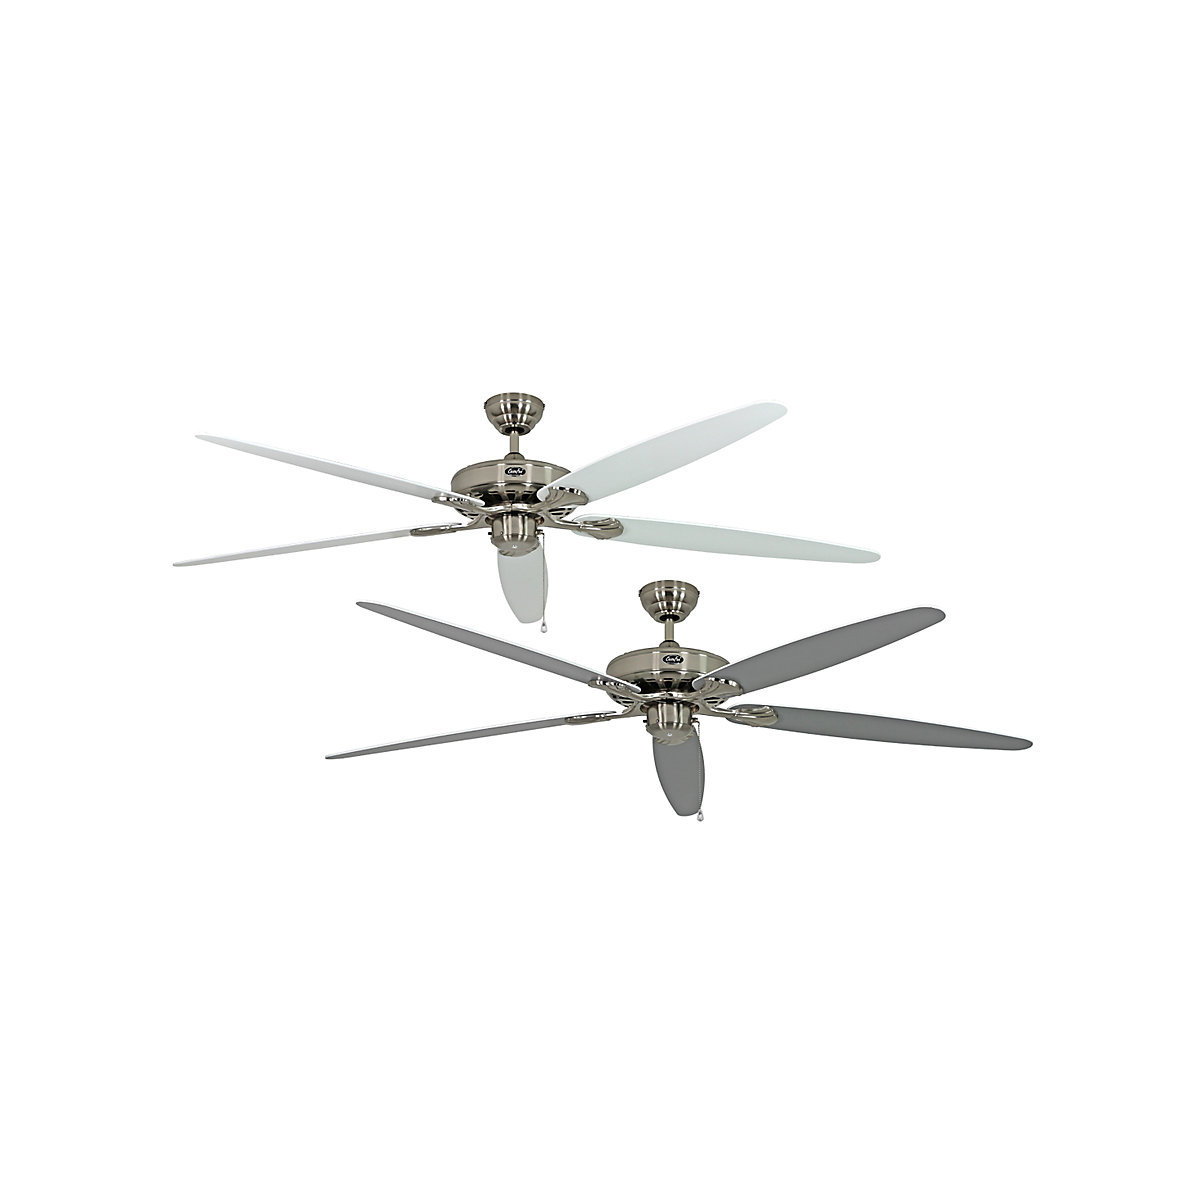 CLASSIC ROYAL ceiling fan, rotor blade Ø 1800 mm, painted white / painted light grey / brushed chrome-9